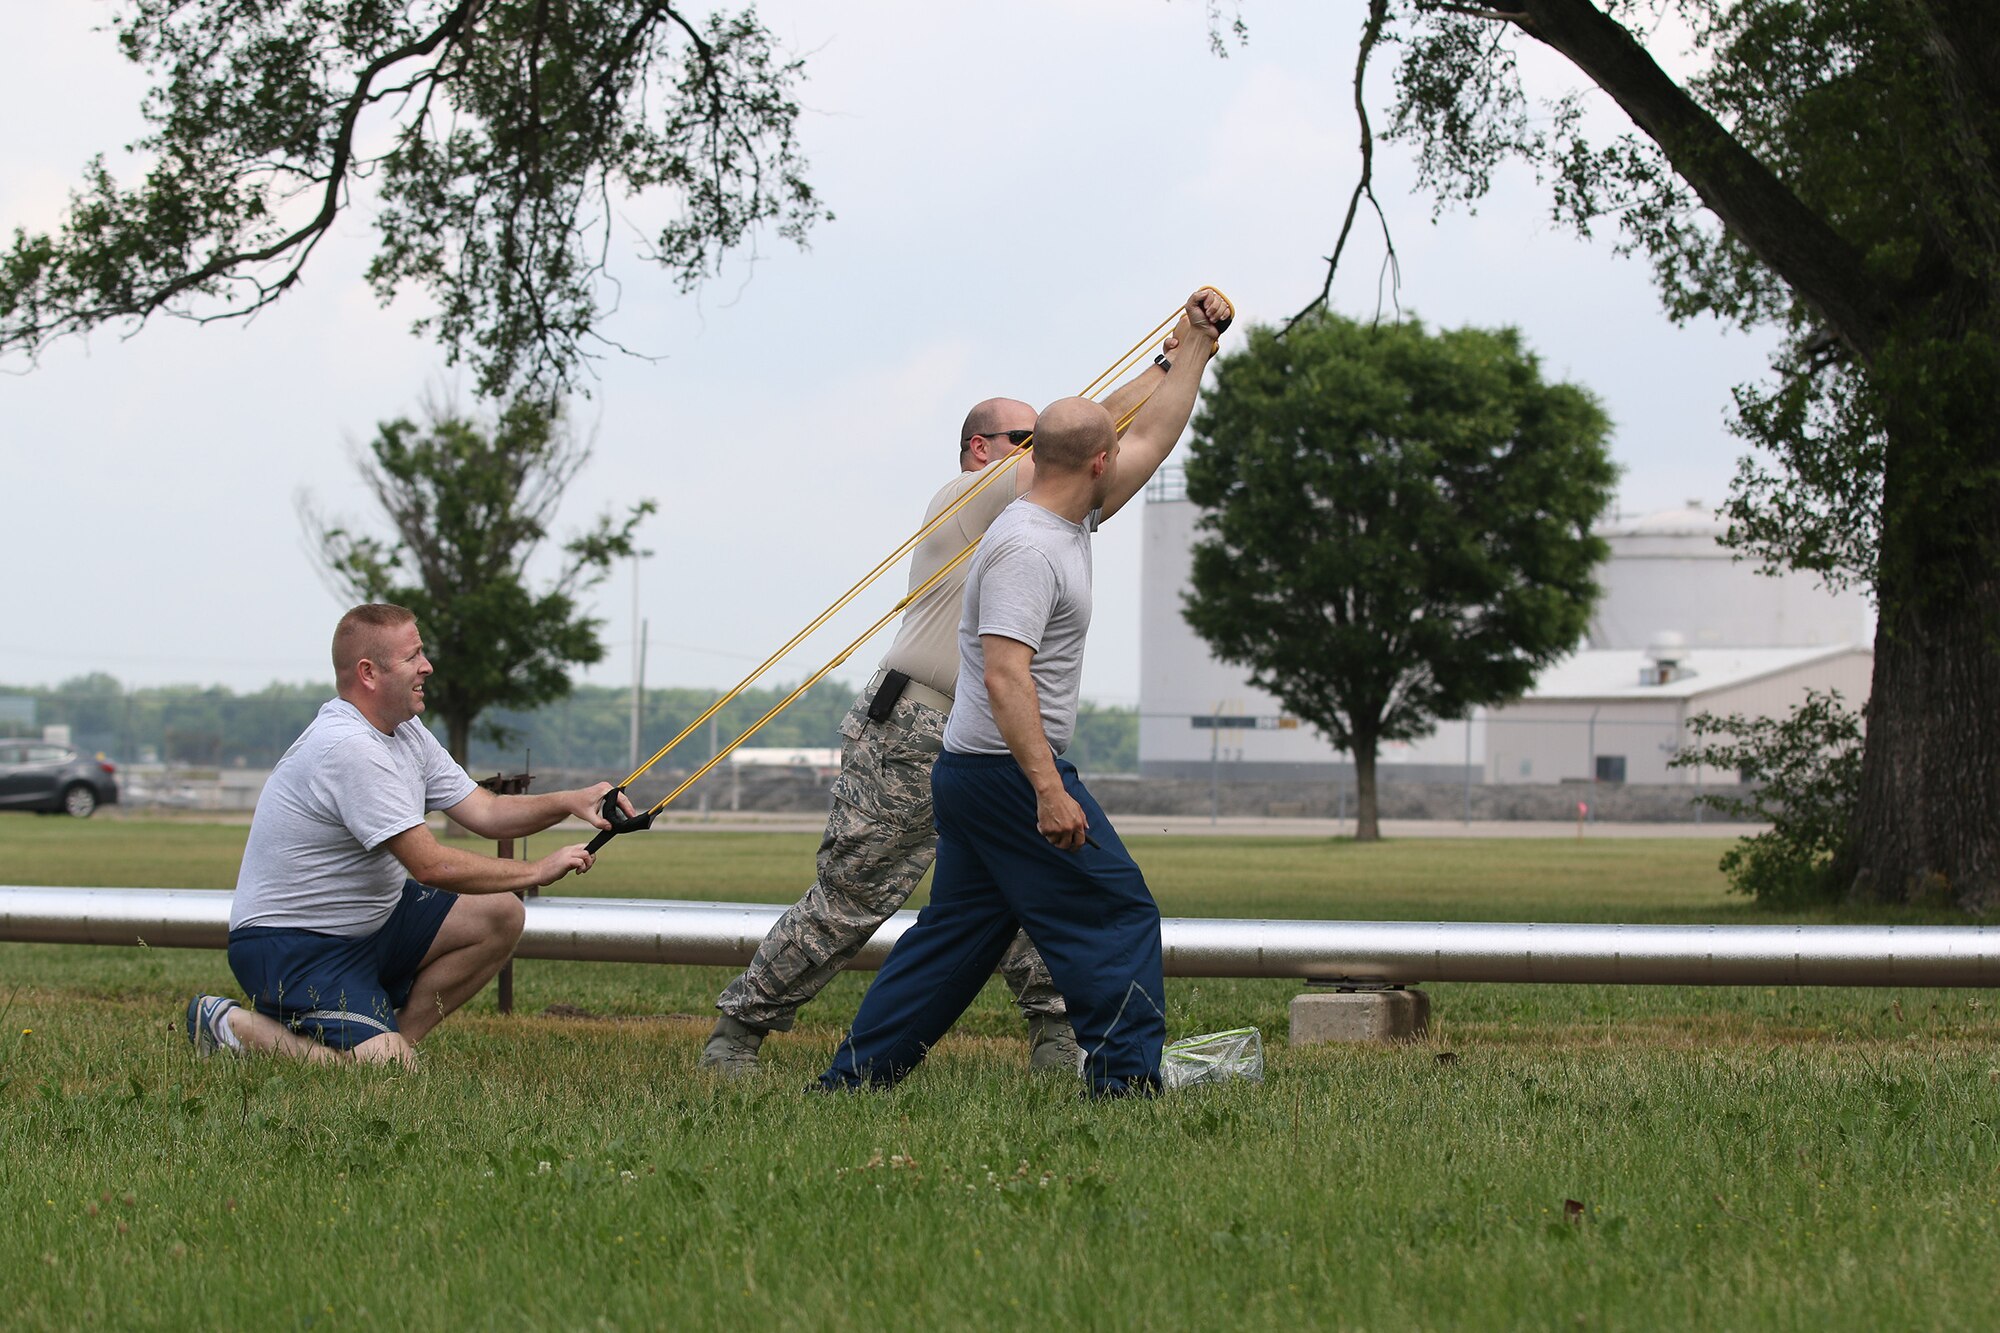 Members of the 445th Aerospace Medicine Squadron take part in a team building exercise here June 6, 2018.  Members trained on weapons handling, patient transport, battlefield triage, and stretcher maneuvers.